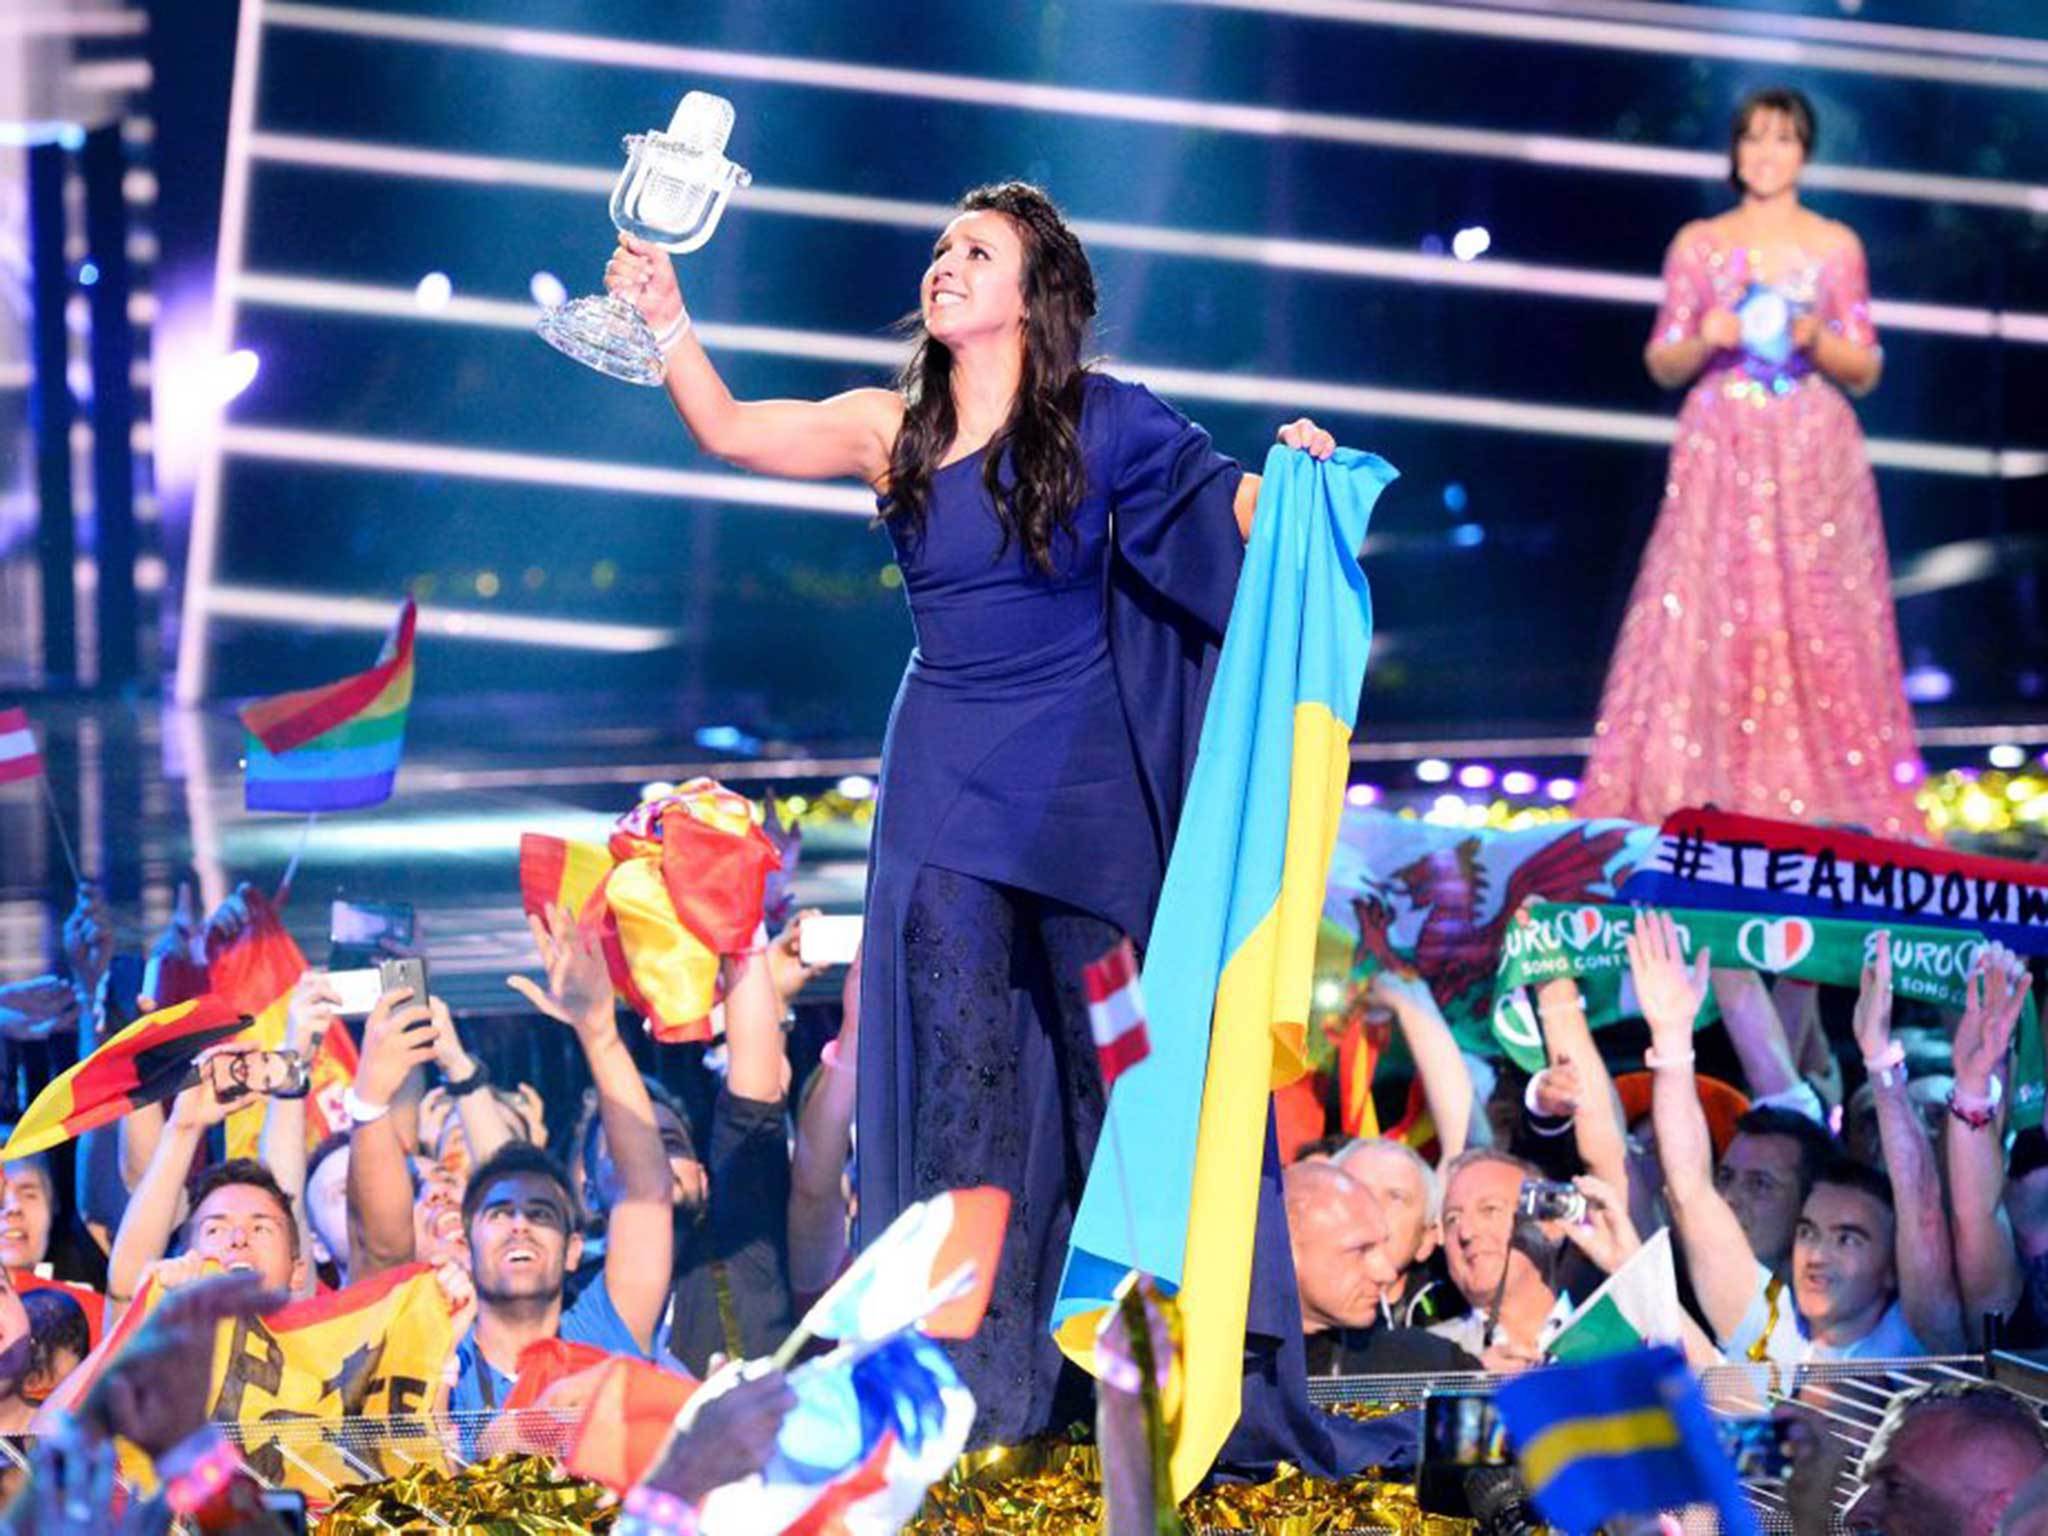 Jamala celebrates winning the Eurovision Song Contest for Ukraine after singing ‘1944’ in English